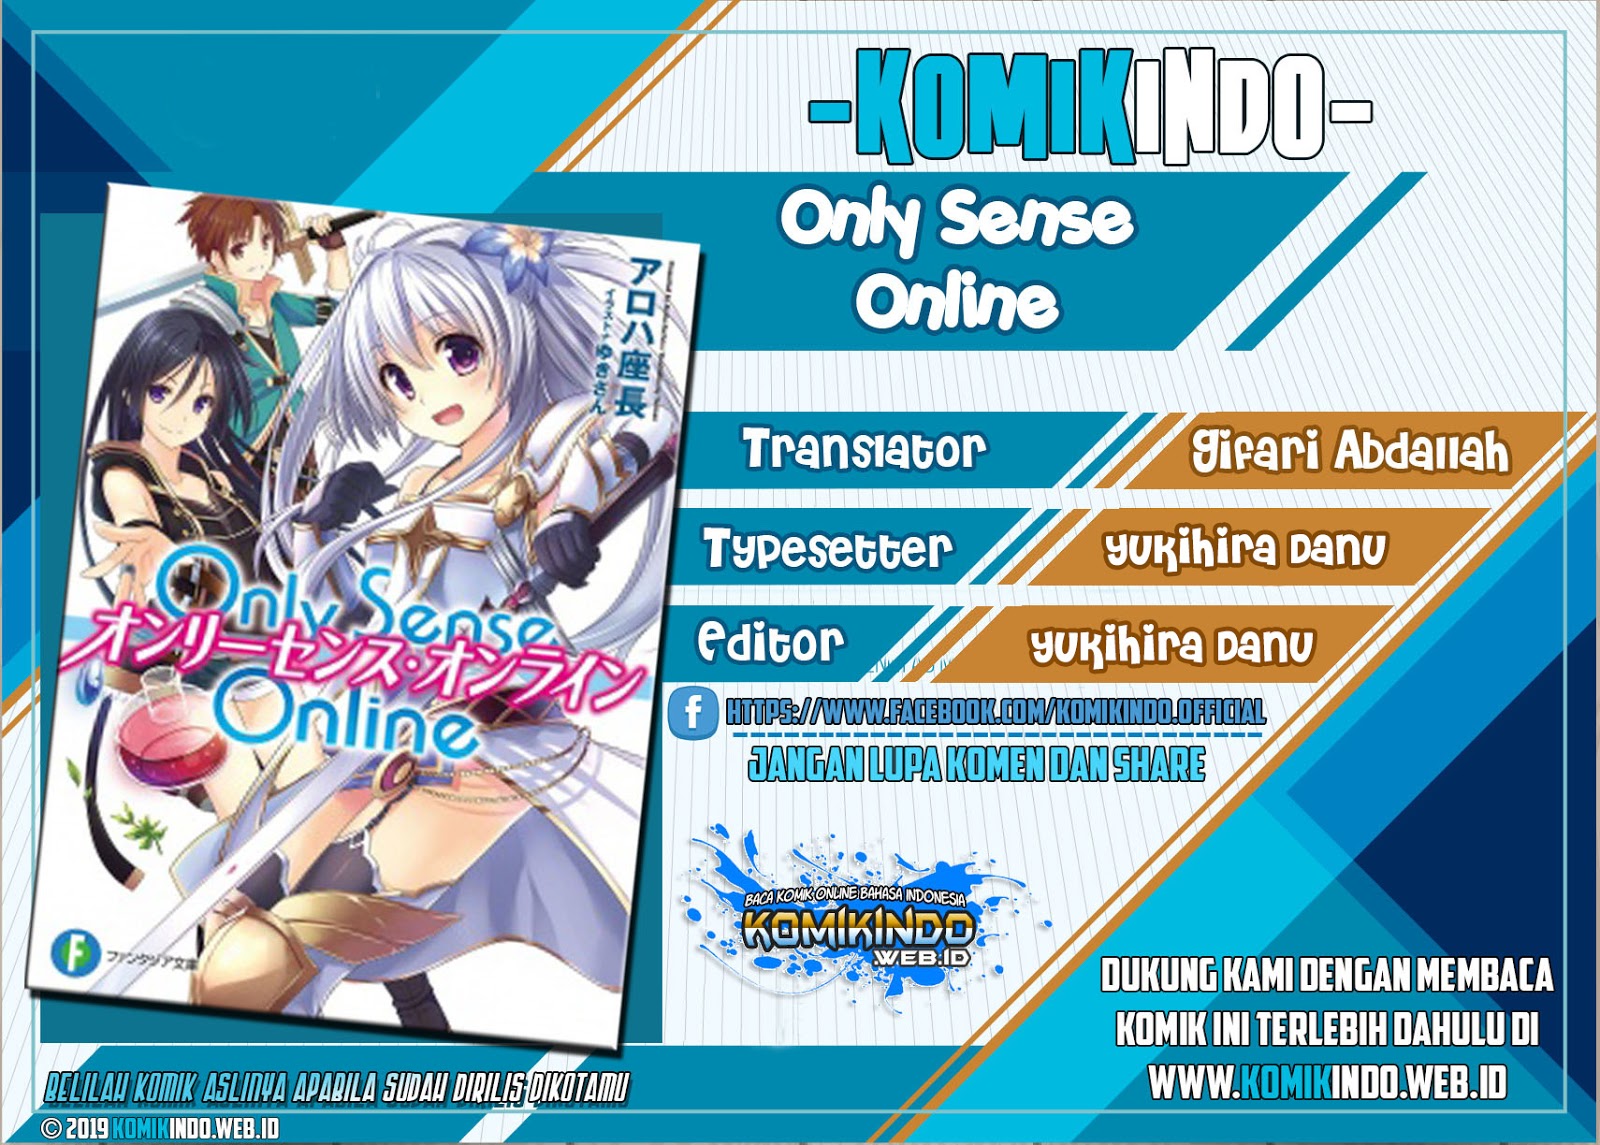 Only Sense Online Chapter 48